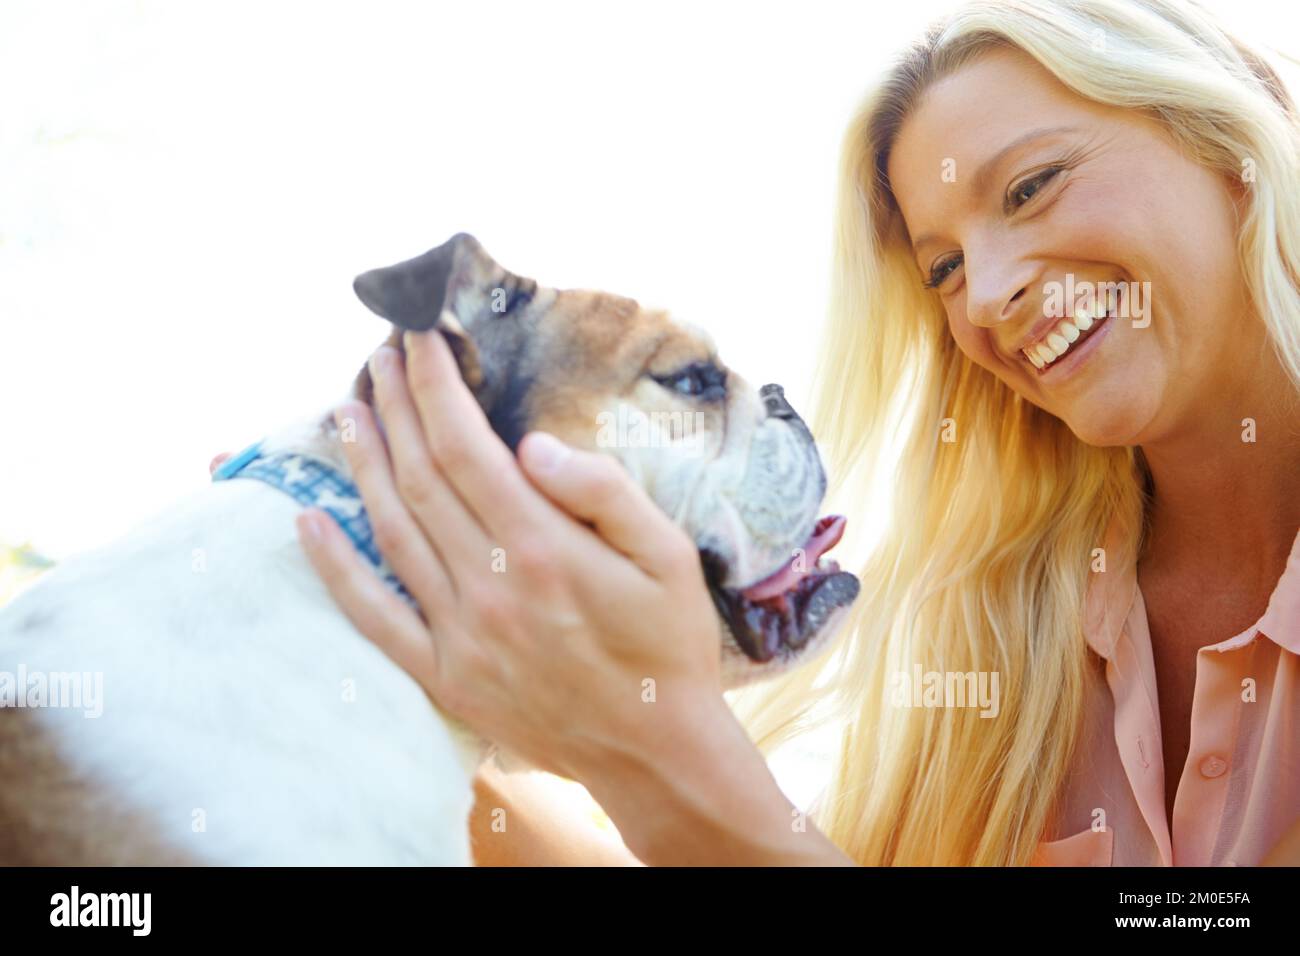 The most loyal friend anyone could have. A happy blonde laughing while playing with her dog outside. Stock Photo